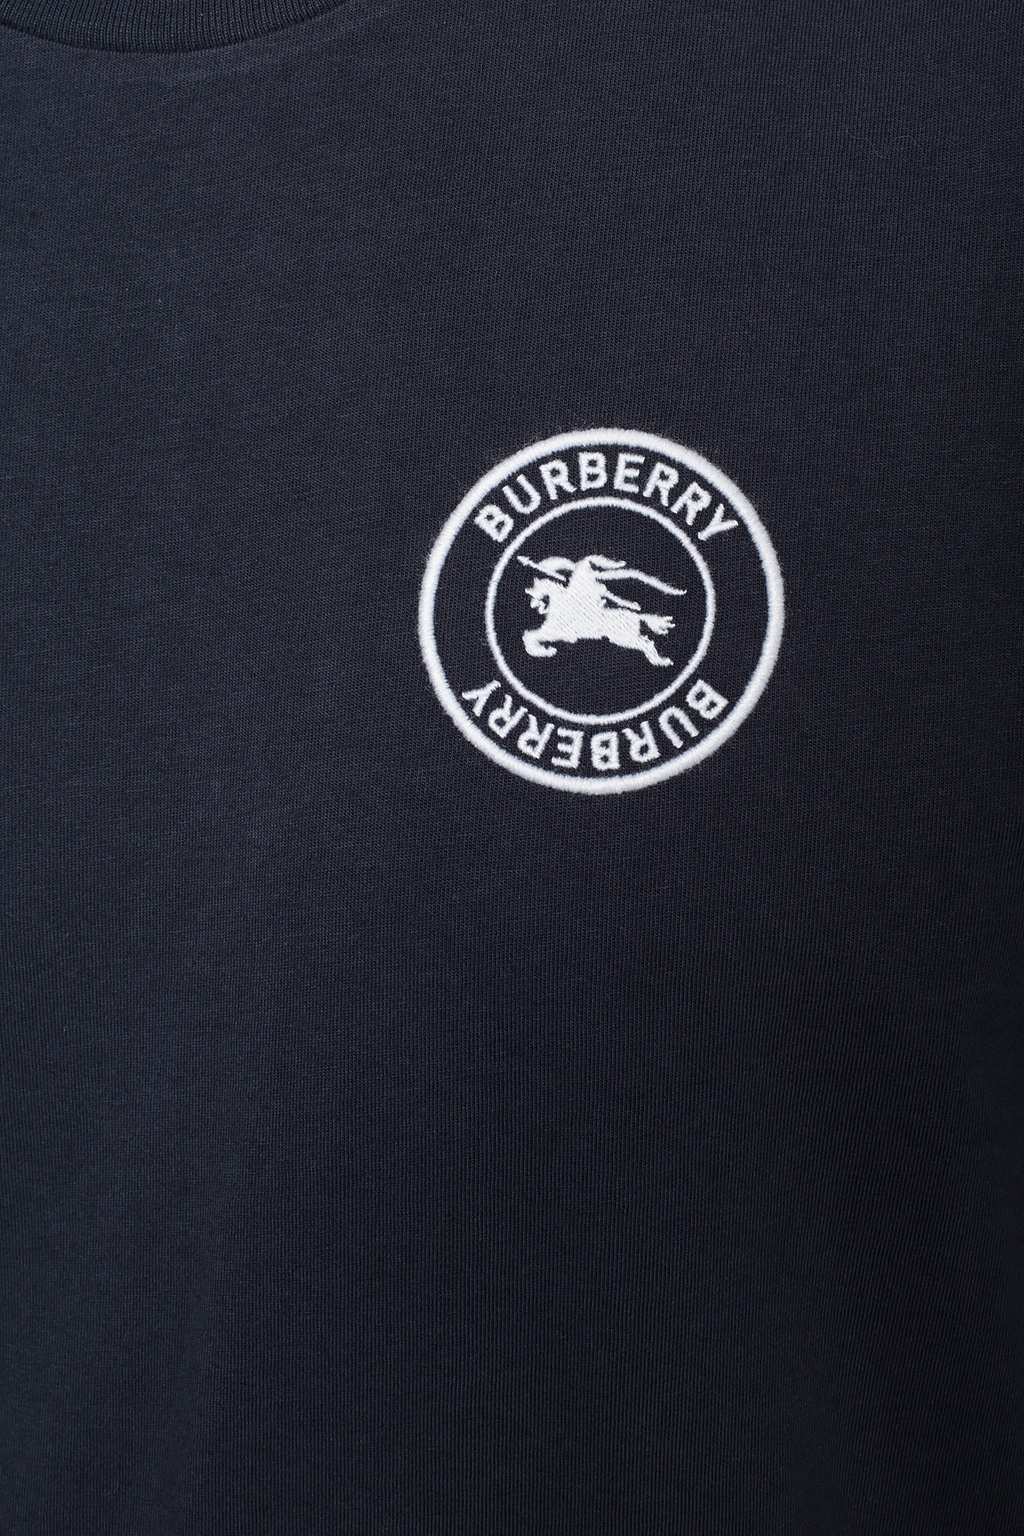 Navy blue T-shirt with an embroidered logo Burberry - Vitkac TW